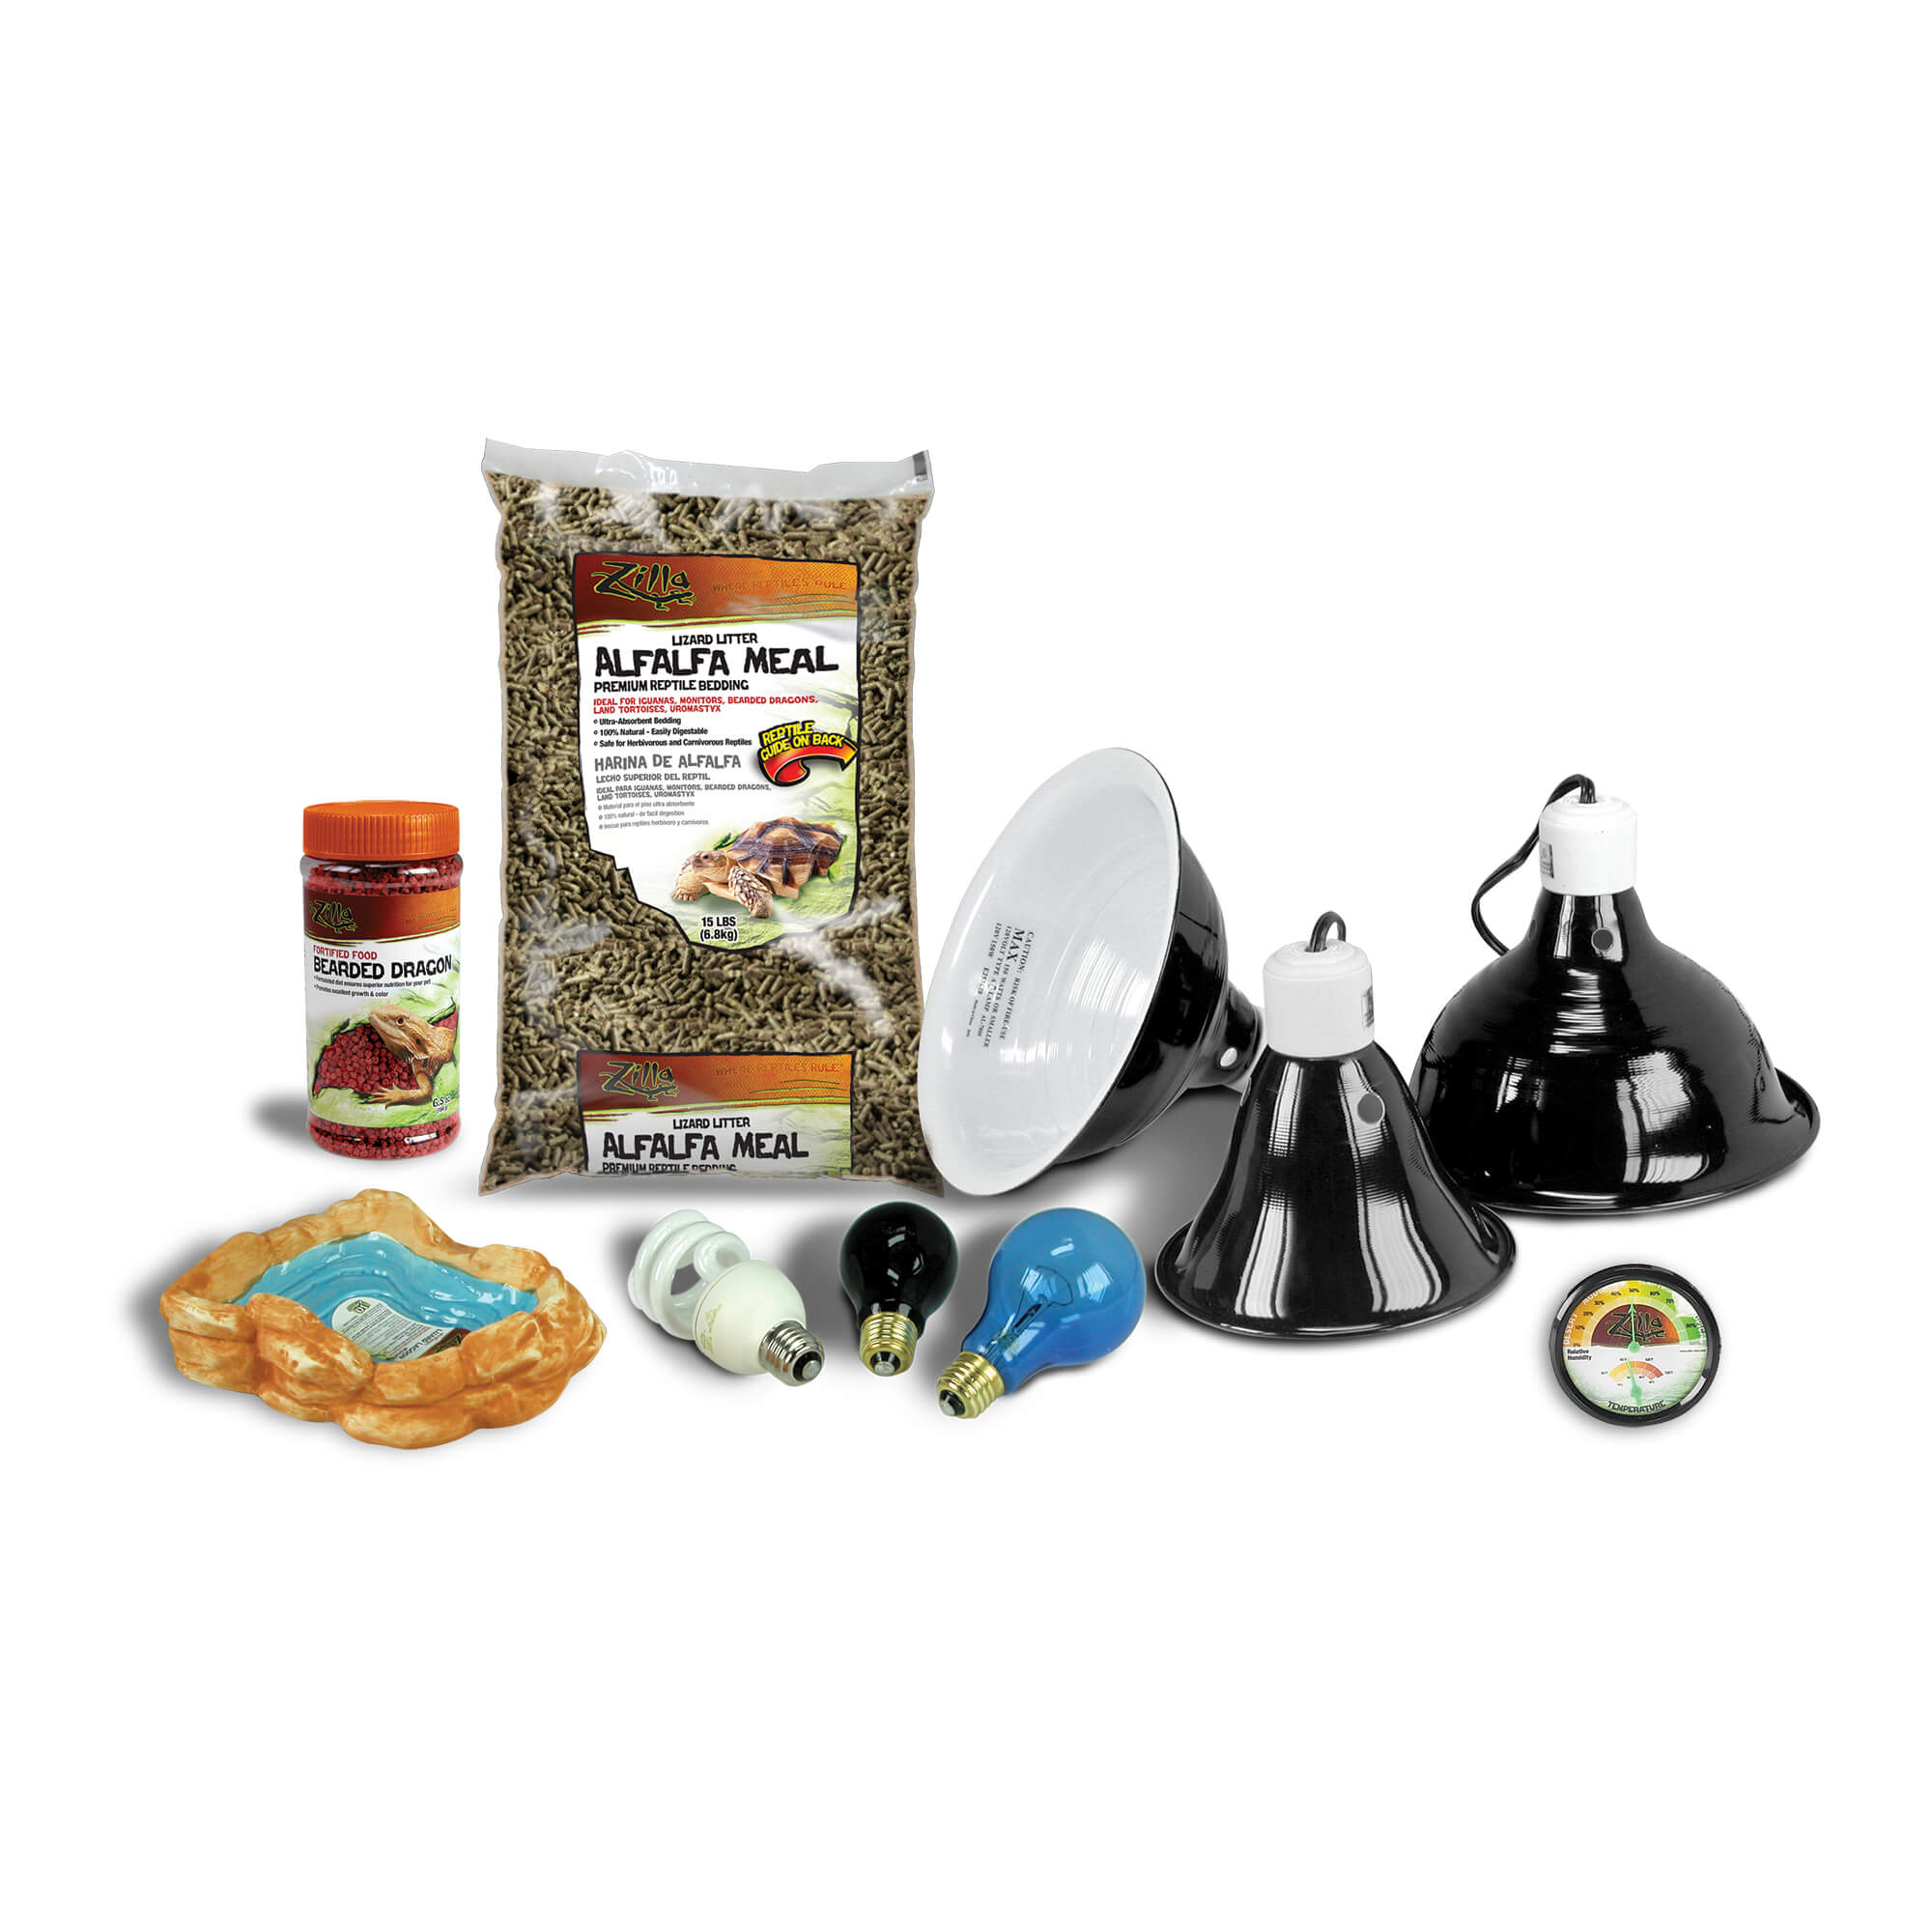 Zilla Deluxe 36L XL Bearded Dragon Kit Contents